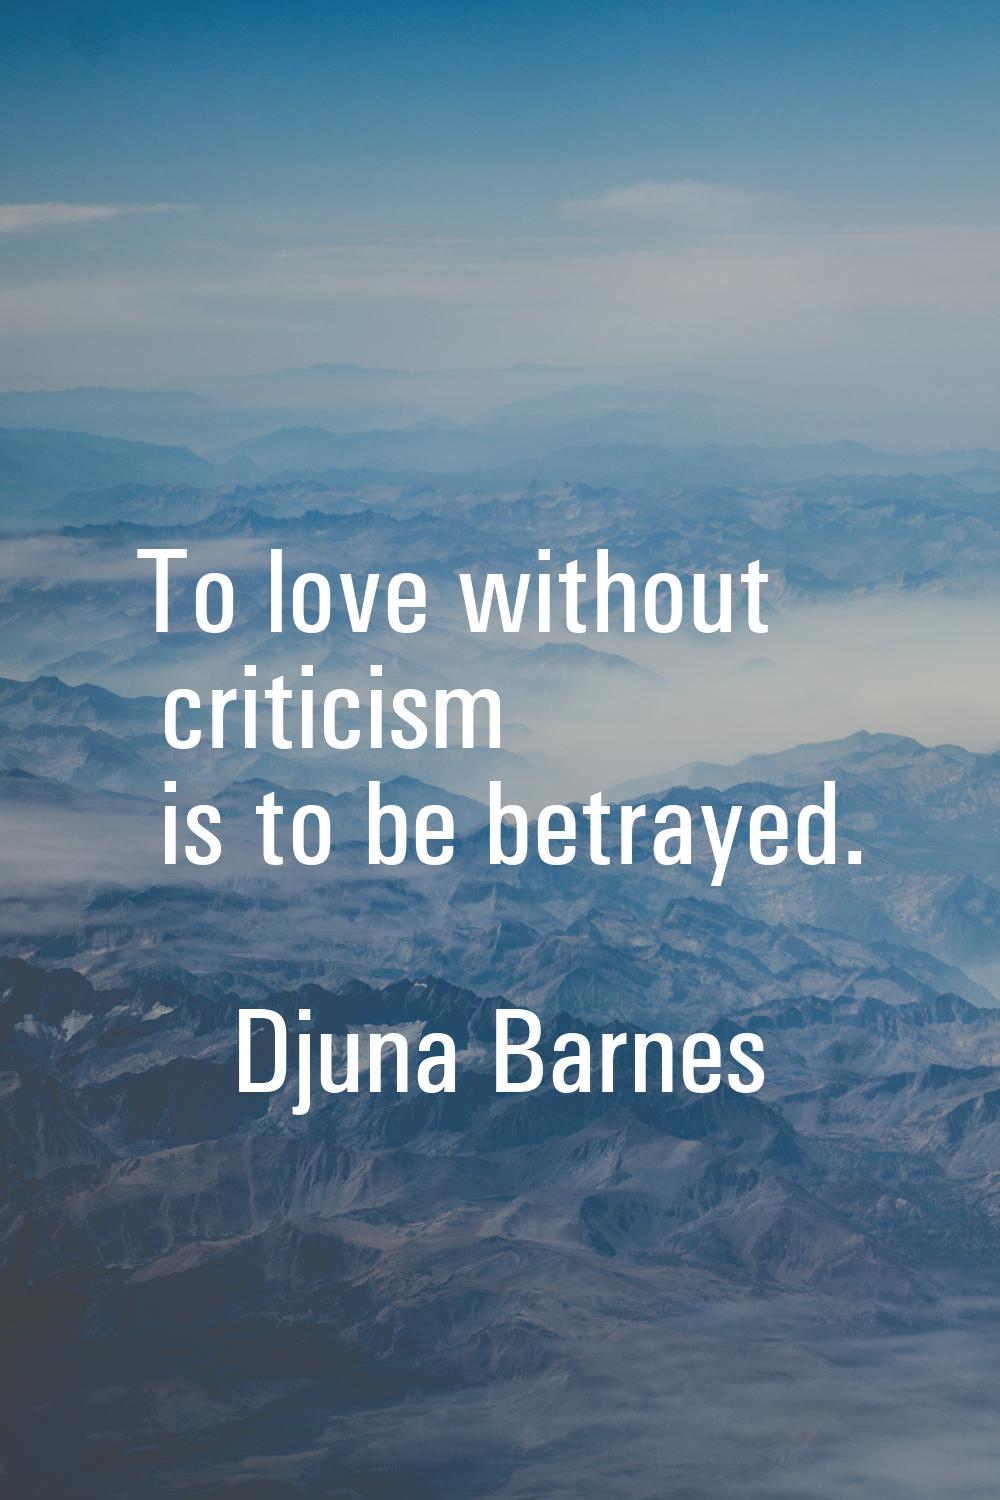 To love without criticism is to be betrayed.